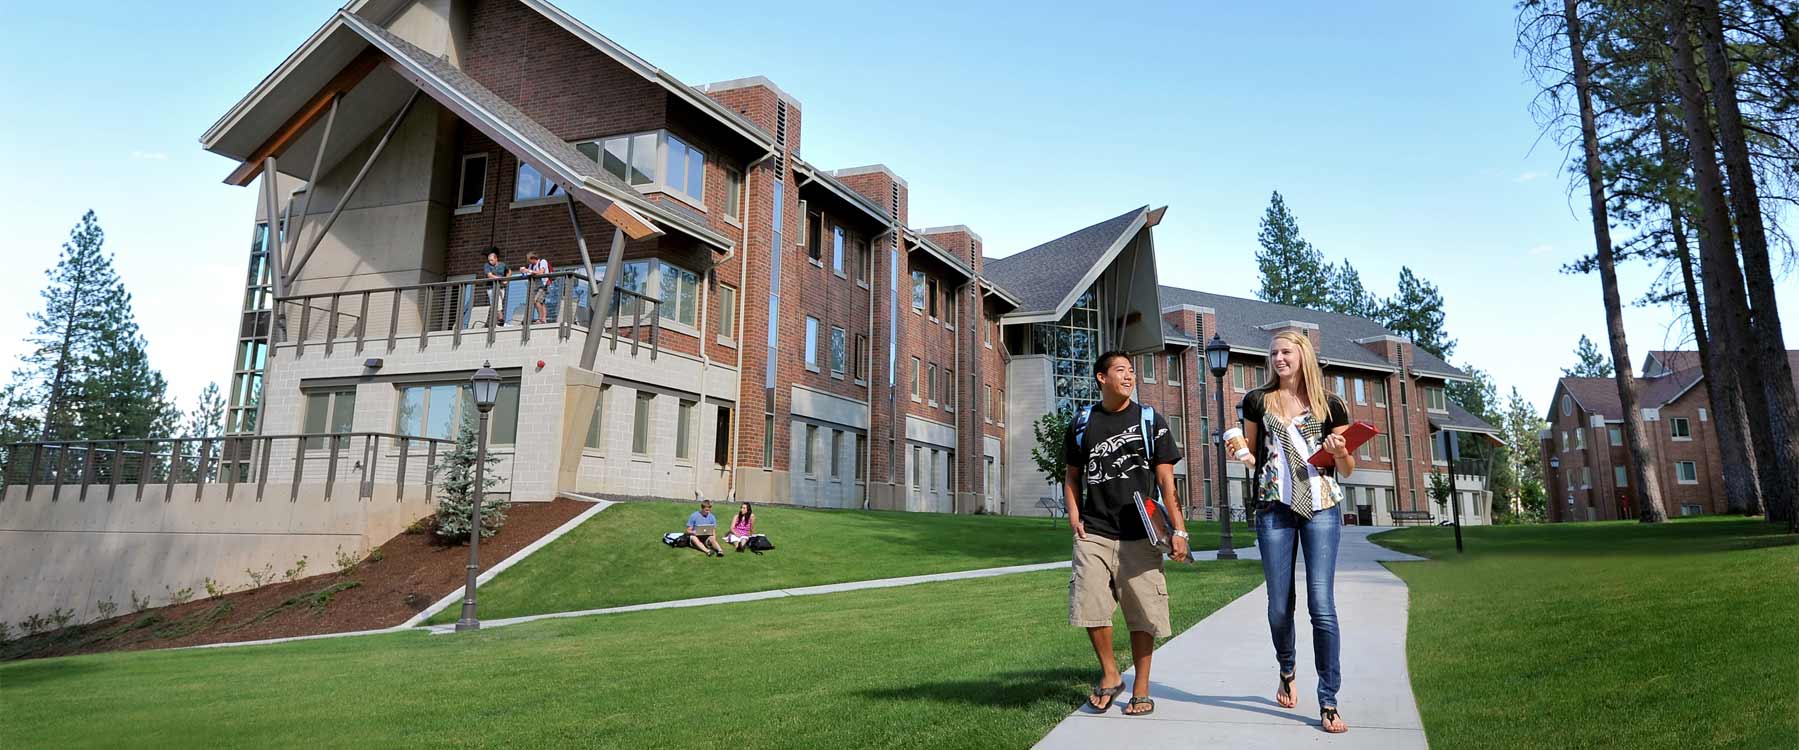 Two students walk on the path away from Oliver Hall, a large three-story brick residence hall.